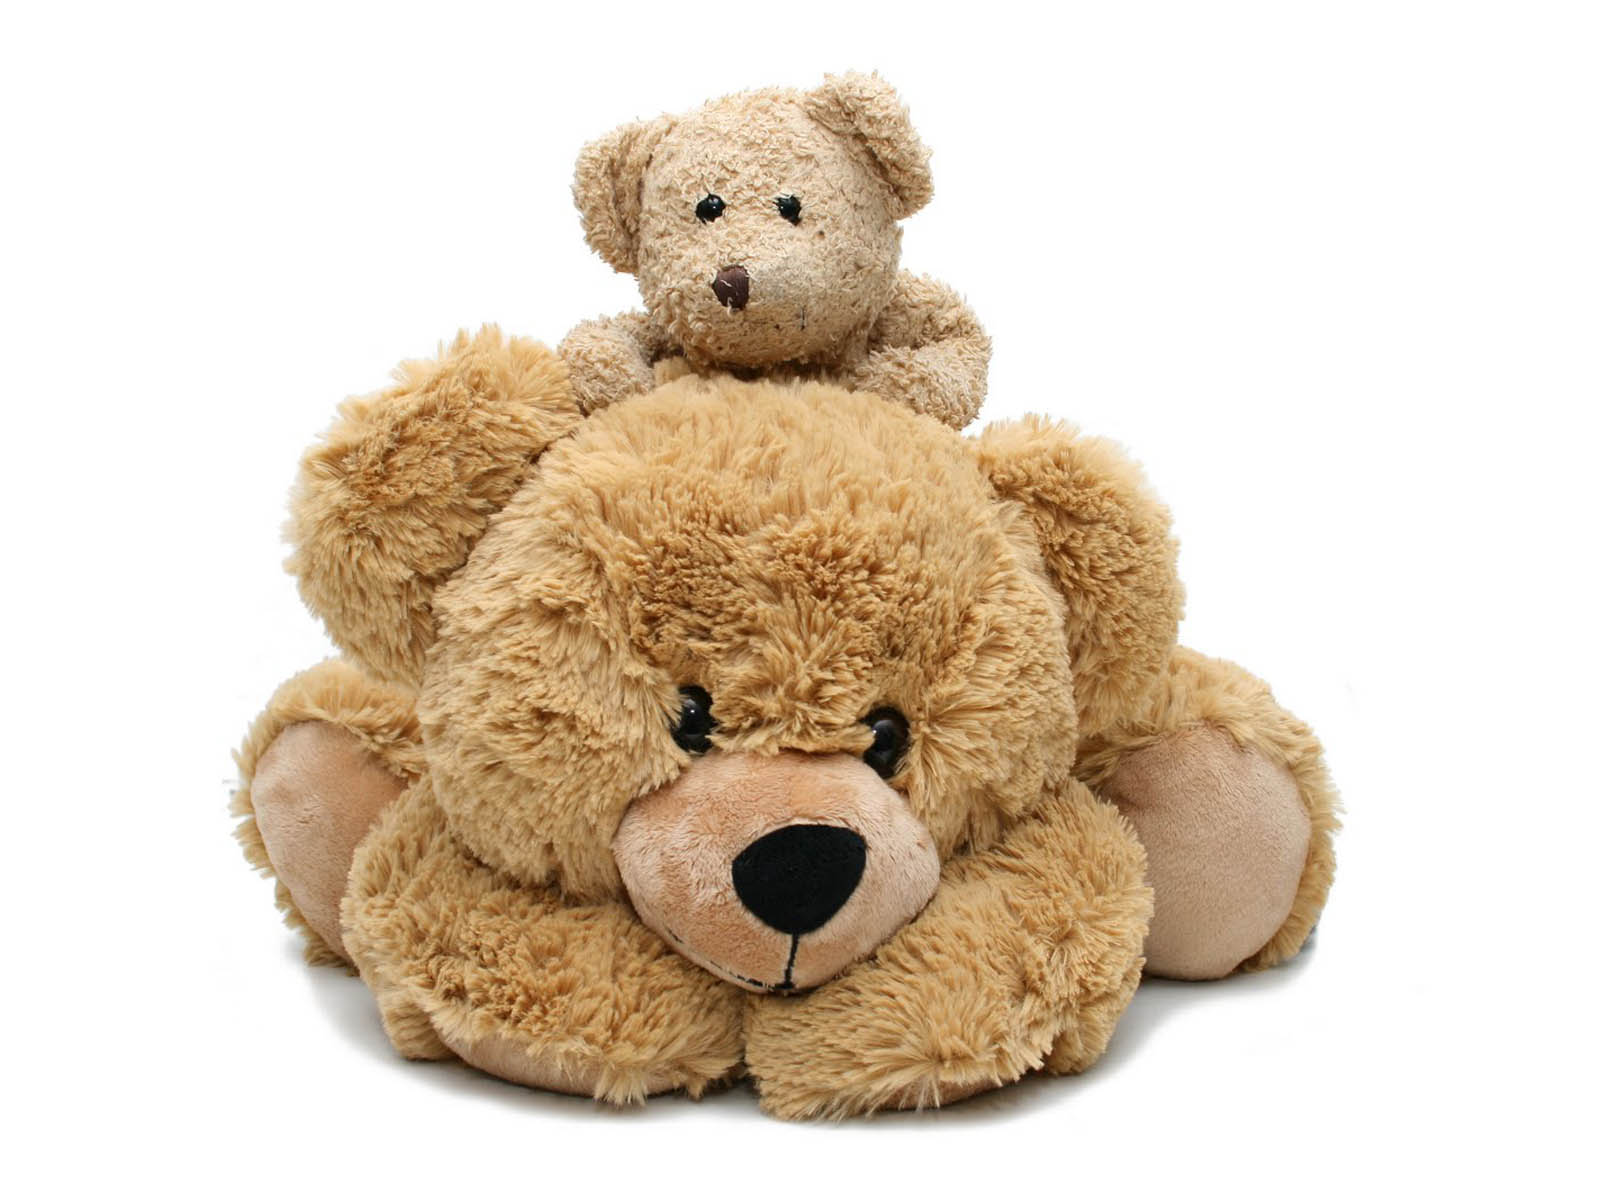 HD Wallpapers: Teddy Bear Pictures